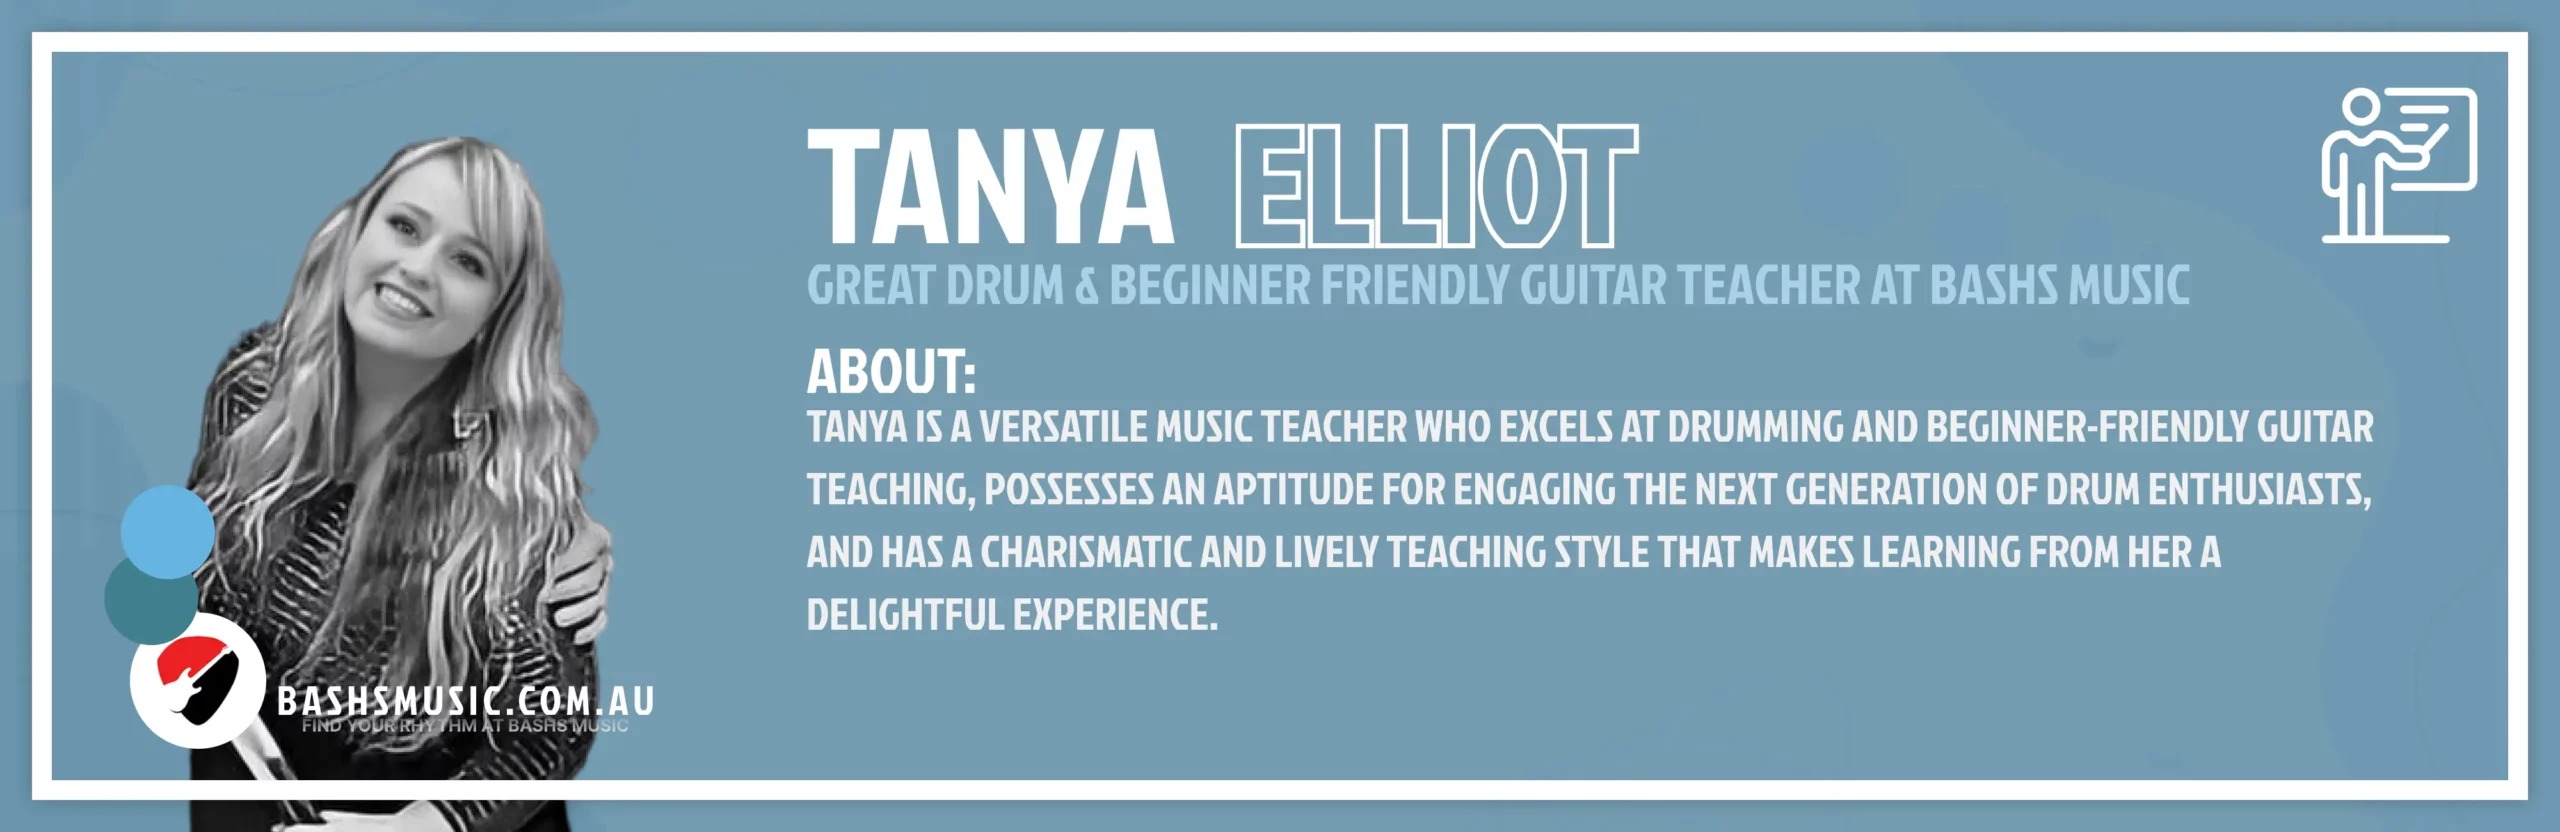 Tanya Elliot
Great Drum & Beginner Friendly Guitar Teacher At Bashs Music
Tanya is a versatile music teacher who excels at drumming and beginner-friendly guitar teaching, possesses an aptitude for engaging the next generation of drum enthusiasts, and has a charismatic and lively teaching style that makes learning from her a delightful experience.